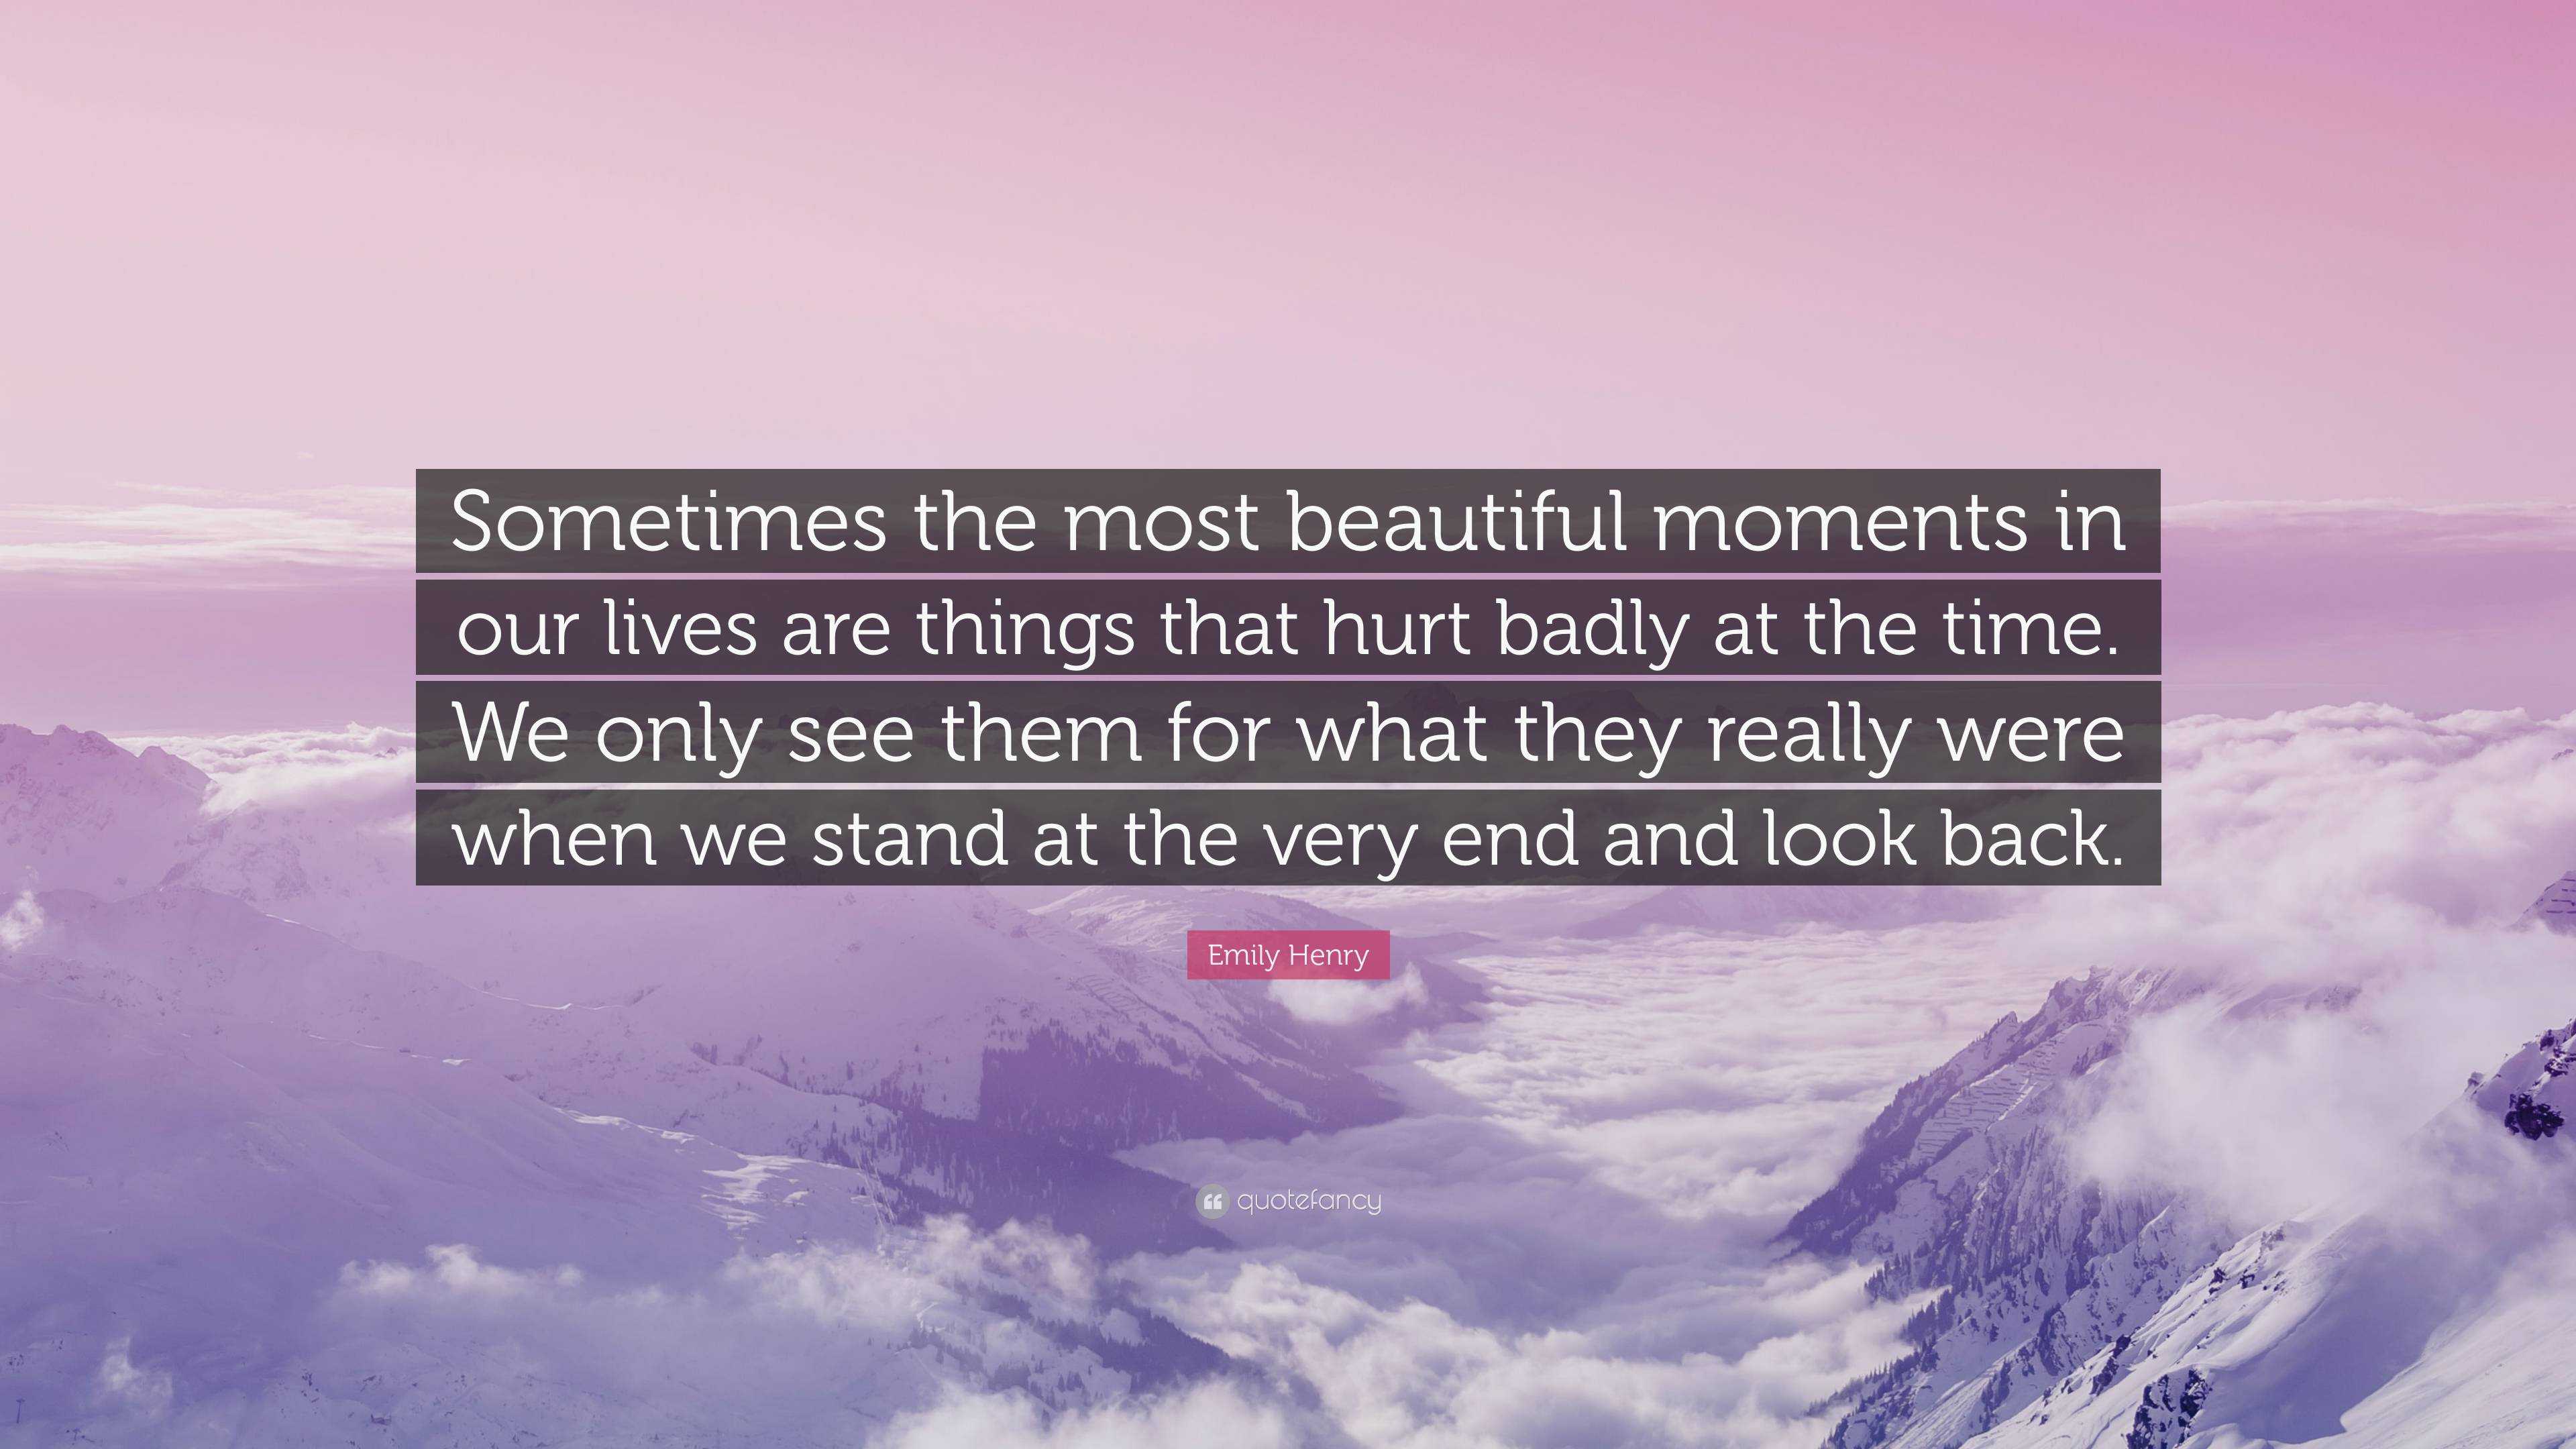 Emily Henry Quote: “Sometimes the most beautiful moments in our lives